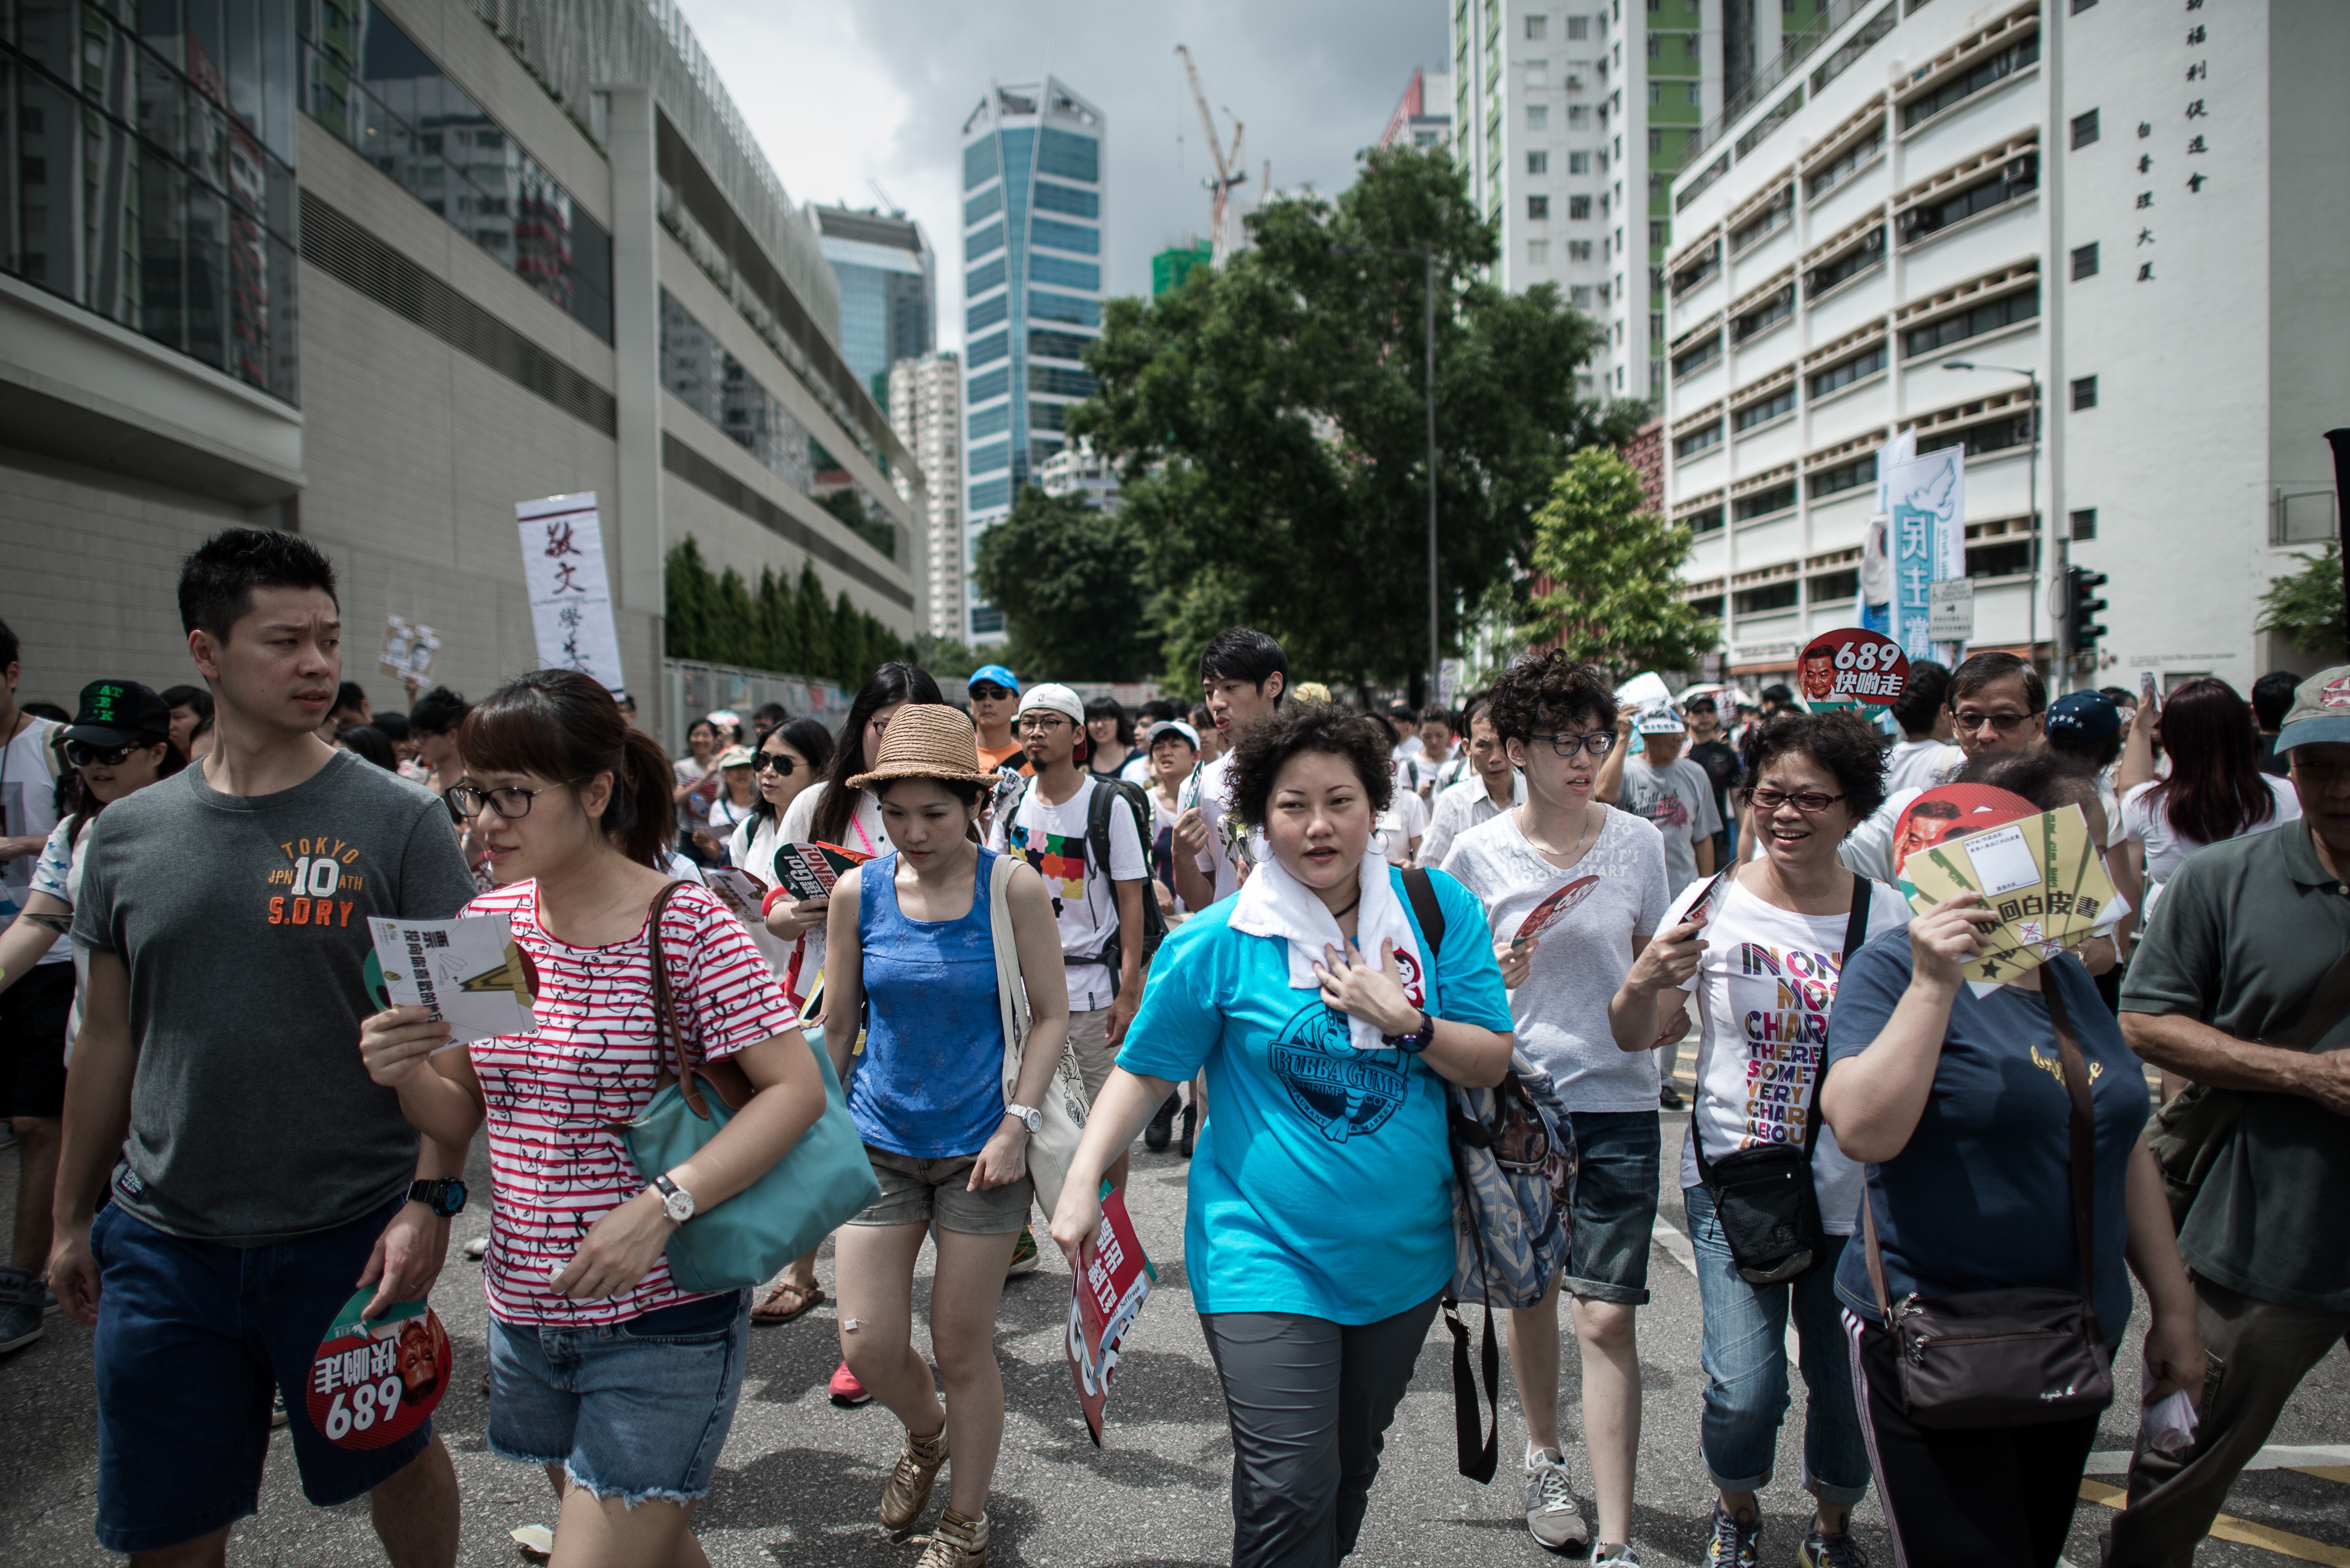 Demonstrators walk on their way to join a pro-democracy rally seeking greater democracy in Hong Kong on July 1, 2014 (Philippe Lopez—AFP/Getty Images)